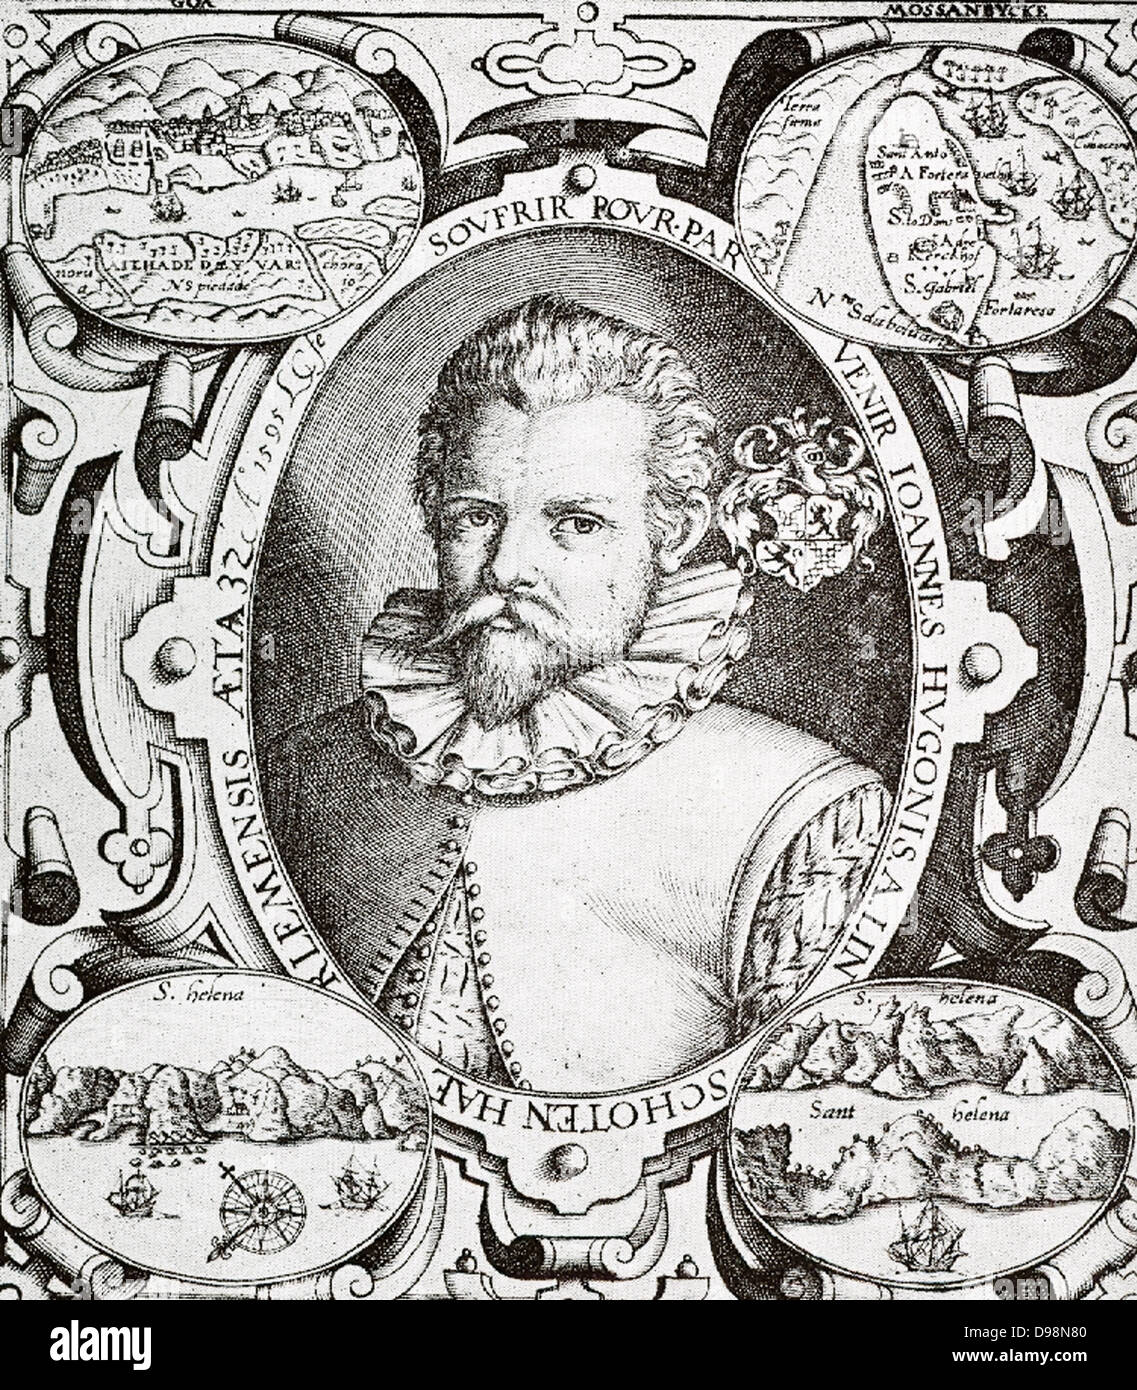 Jan Huyghen van Linschoten (1563, Haarlem – 8 February 1611,)Dutch Protestant merchant, traveller and historian. He is credited with copying top-secret Portuguese nautical maps thus enabling the passage to the elusive East Indies to be opened to the English and the Dutch. This enabled the British East India Company and the Dutch East India Company to break the 16th century monopoly enjoyed by the Portuguese on trade with the East Indies. English: Portrait of Jan Huygen van Linschoten, from the princeps edition of his Itinerario. 17th century. Stock Photo